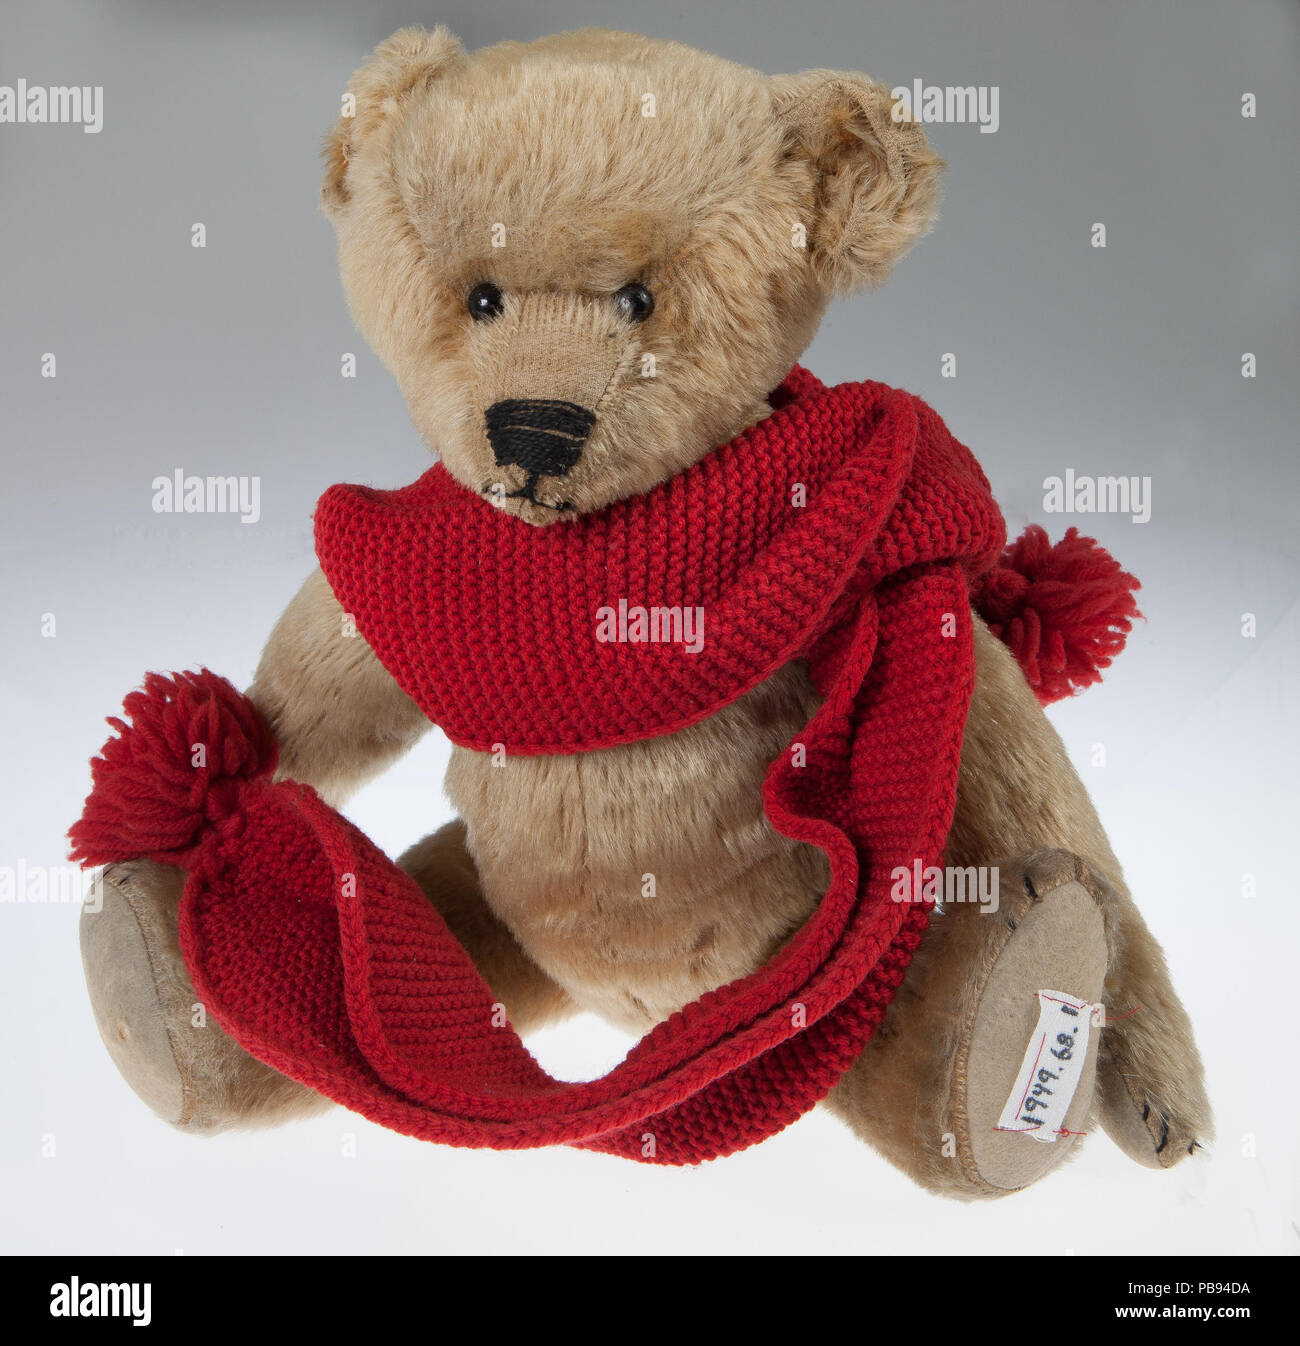 Lot - U.S. 1994 Limited Edition 1,443 of 3,500 17 Steiff Louis jointed  Growler brown mohair Teddy Bear (44), wearing a heavy St. Louis 1904  World's Fair Grand Prize metal. Has Ear